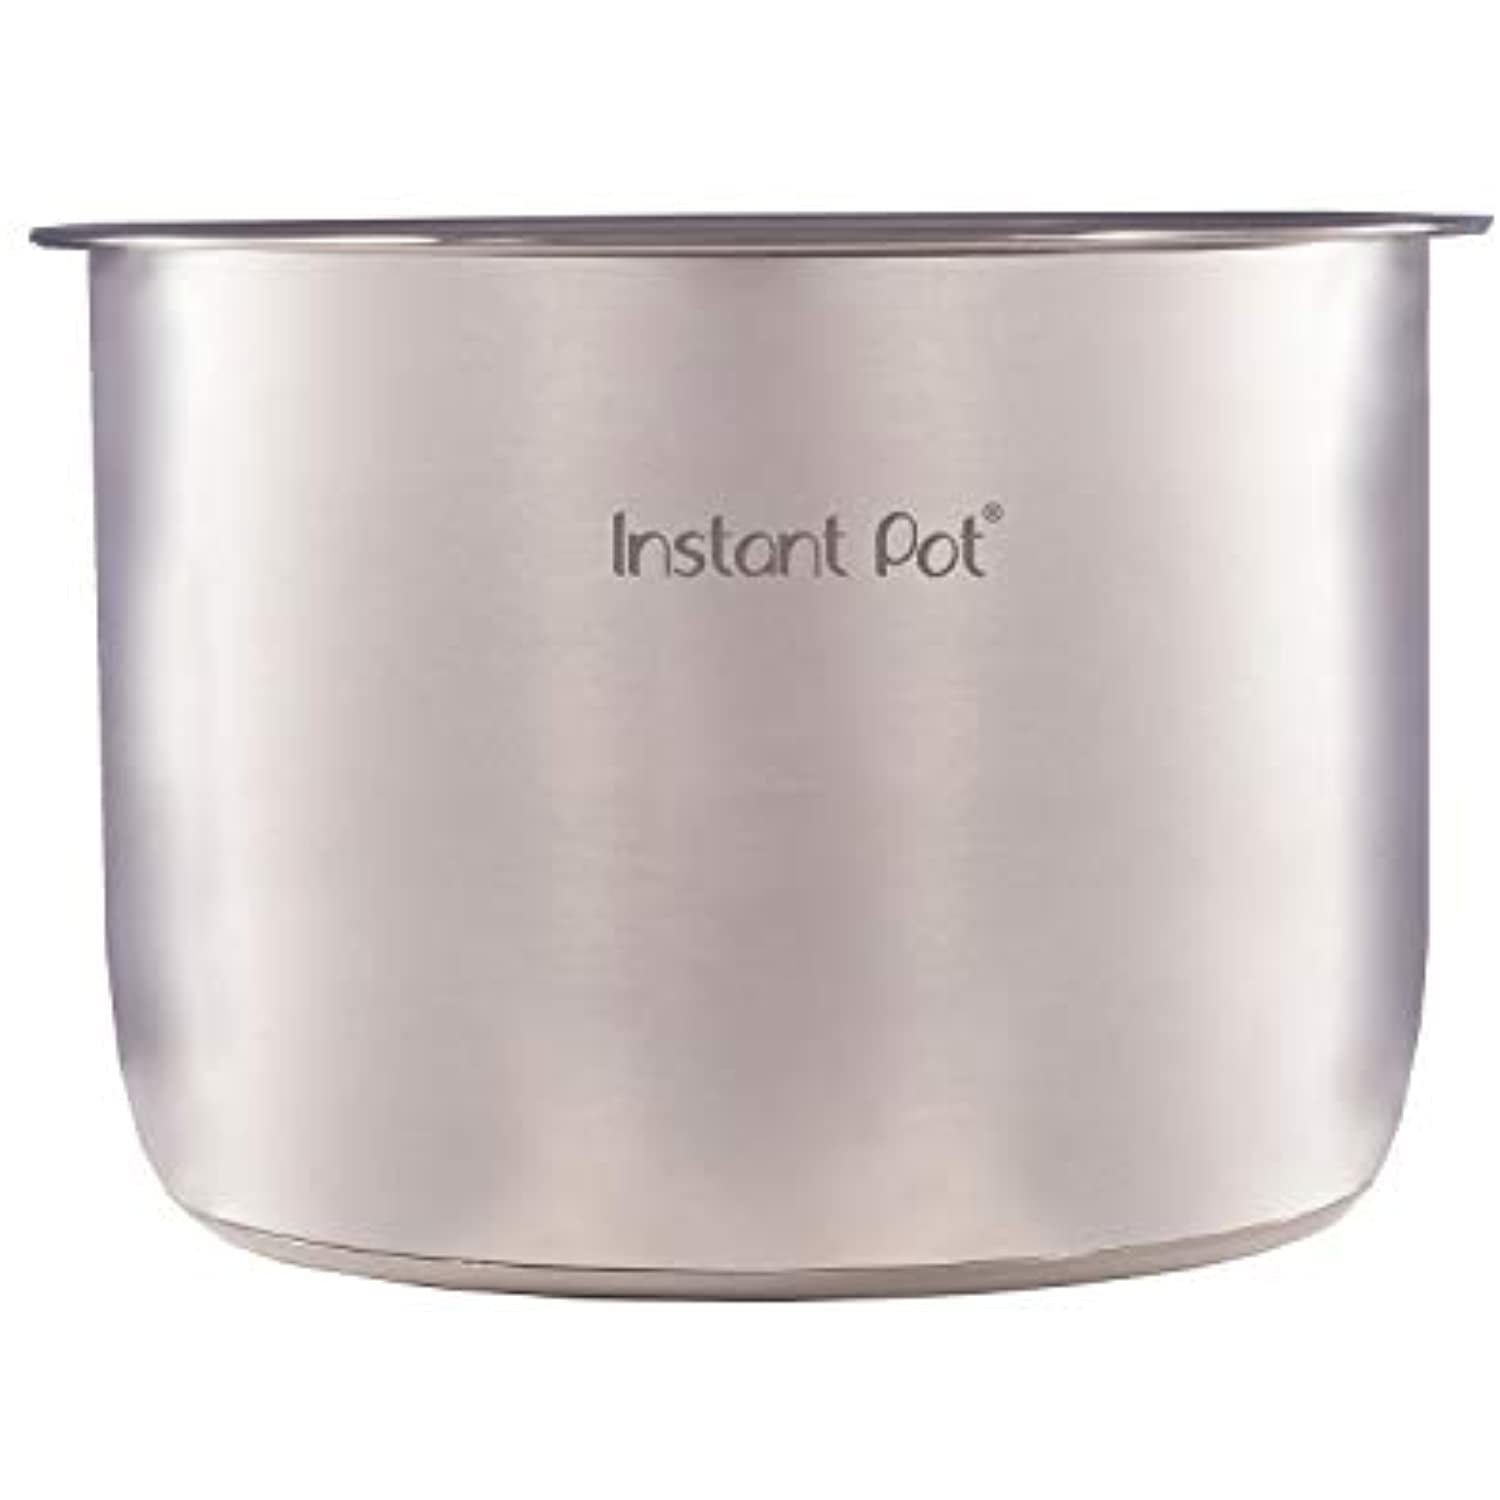 Instapot Stainless steel pot - household items - by owner - housewares sale  - craigslist